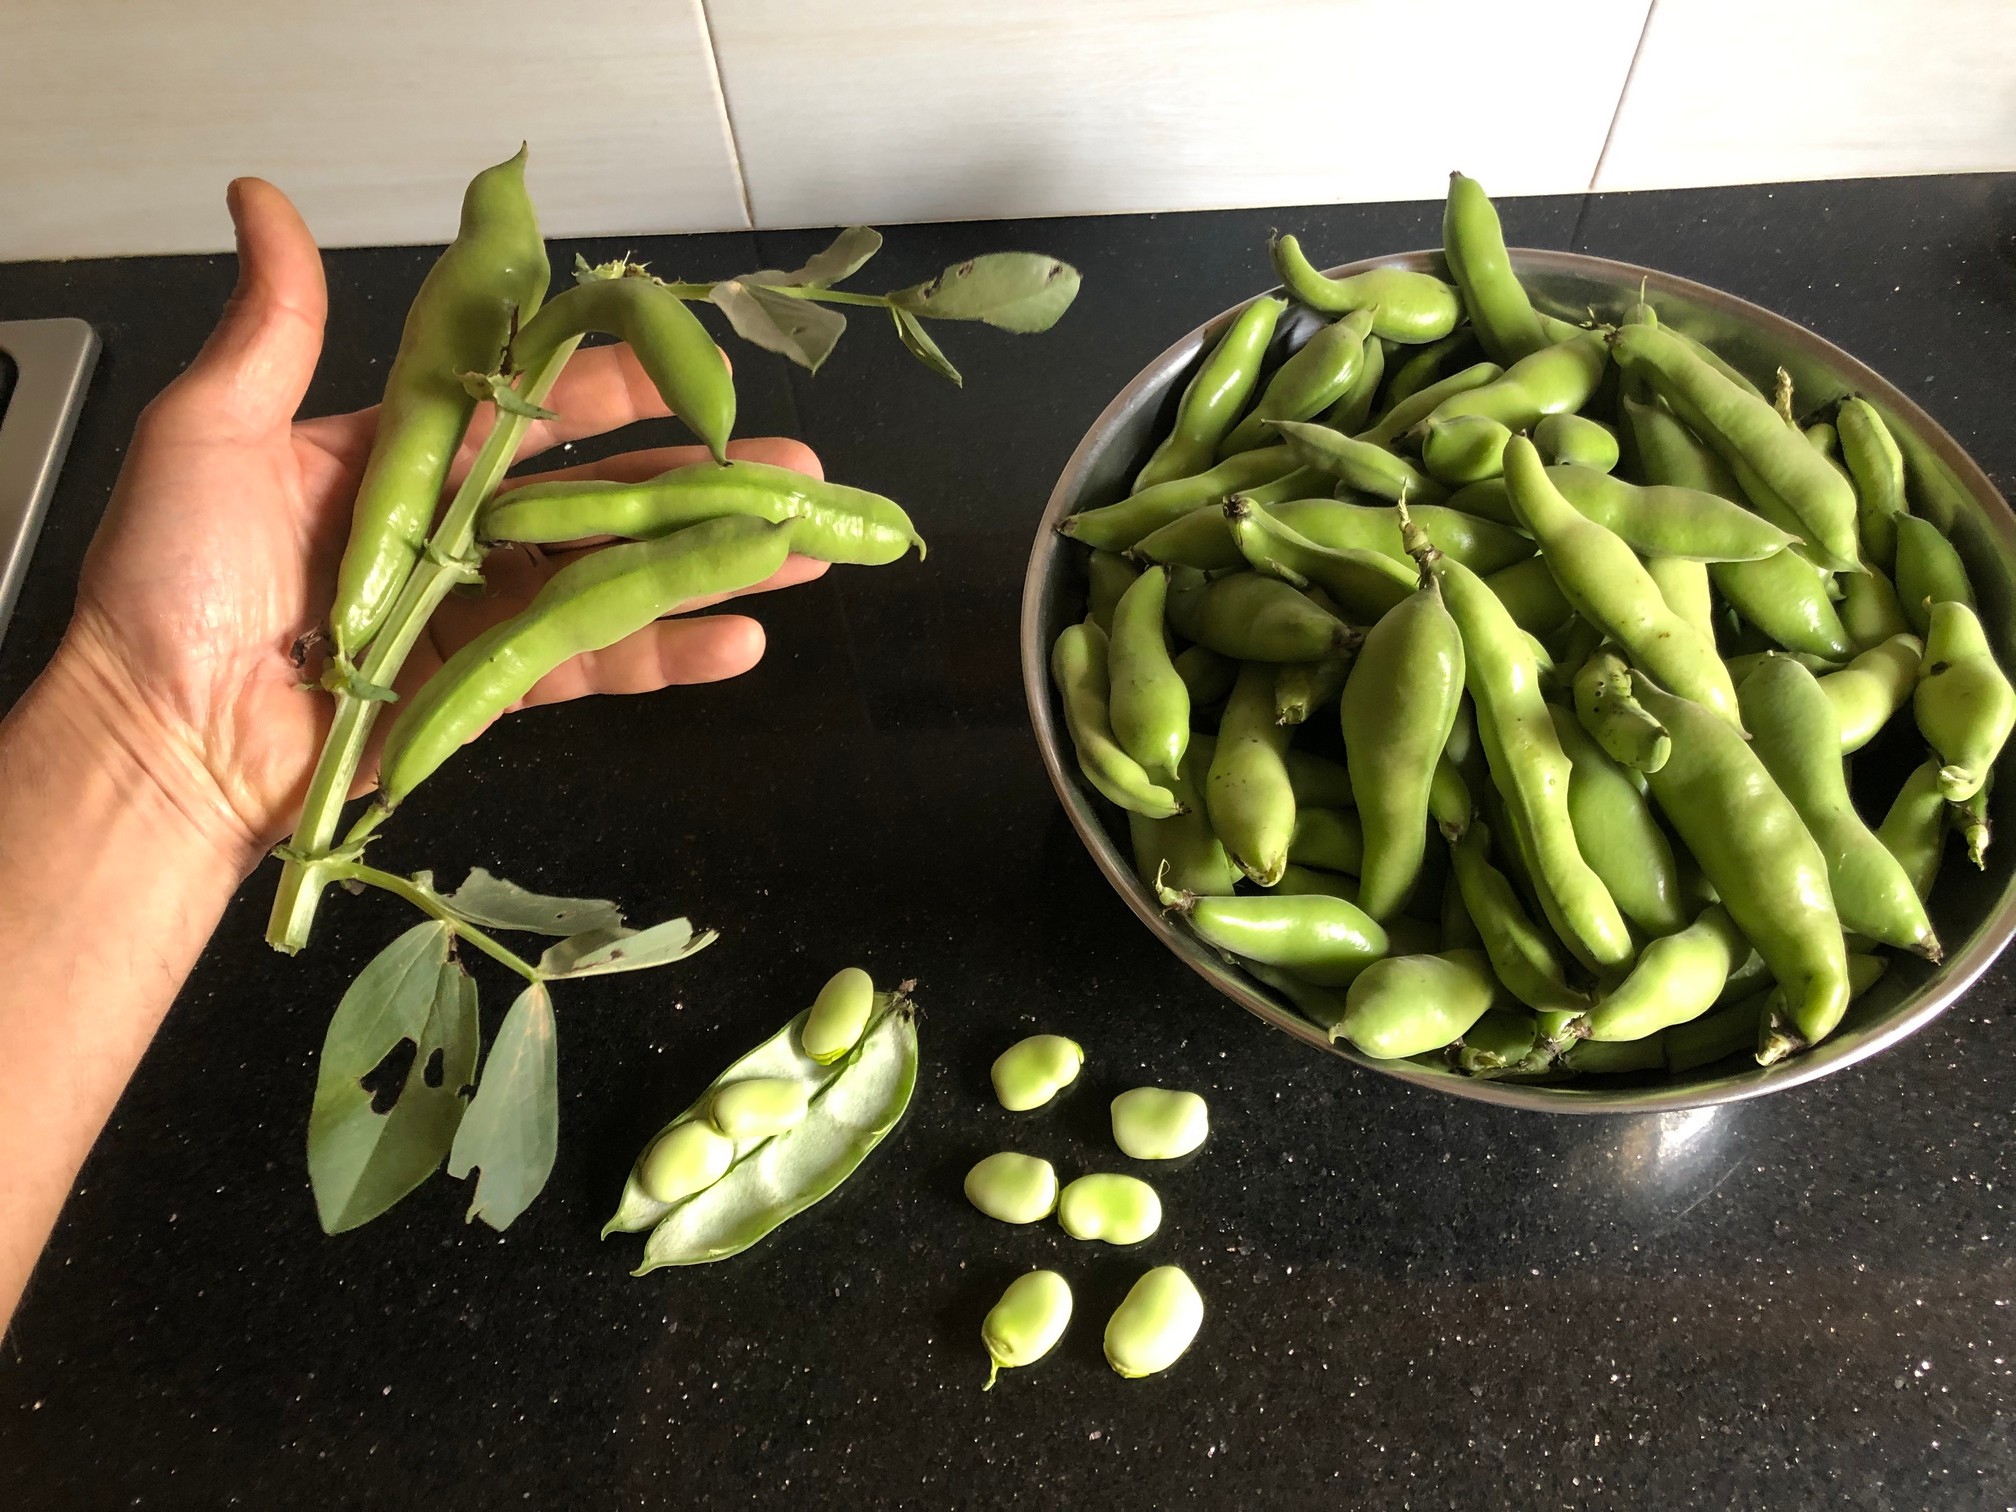 Broad beans are packed with a whole host of vitamins and minerals. Eating broad beans as part of your diet can be beneficial to your bones, brain function, and even your immune system.